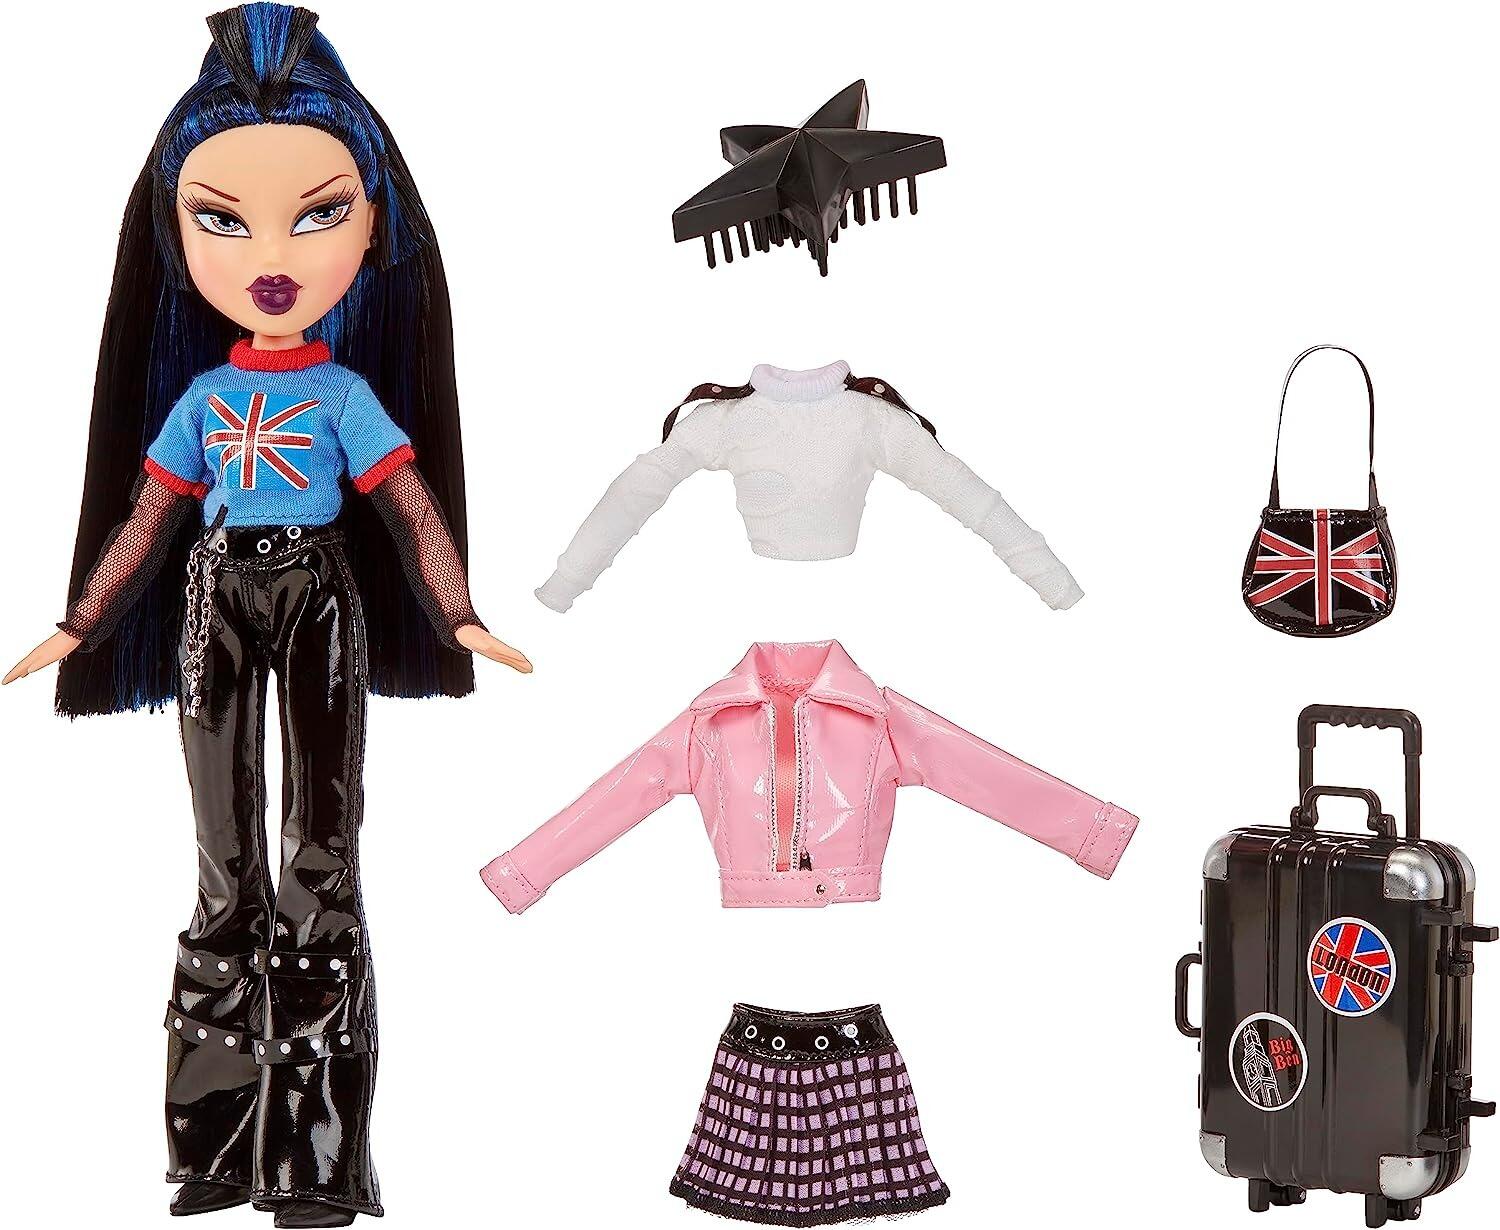 Bratz Pretty ‘N’ Punk Jade Fashion Doll with 2 Outfits and Suitcase